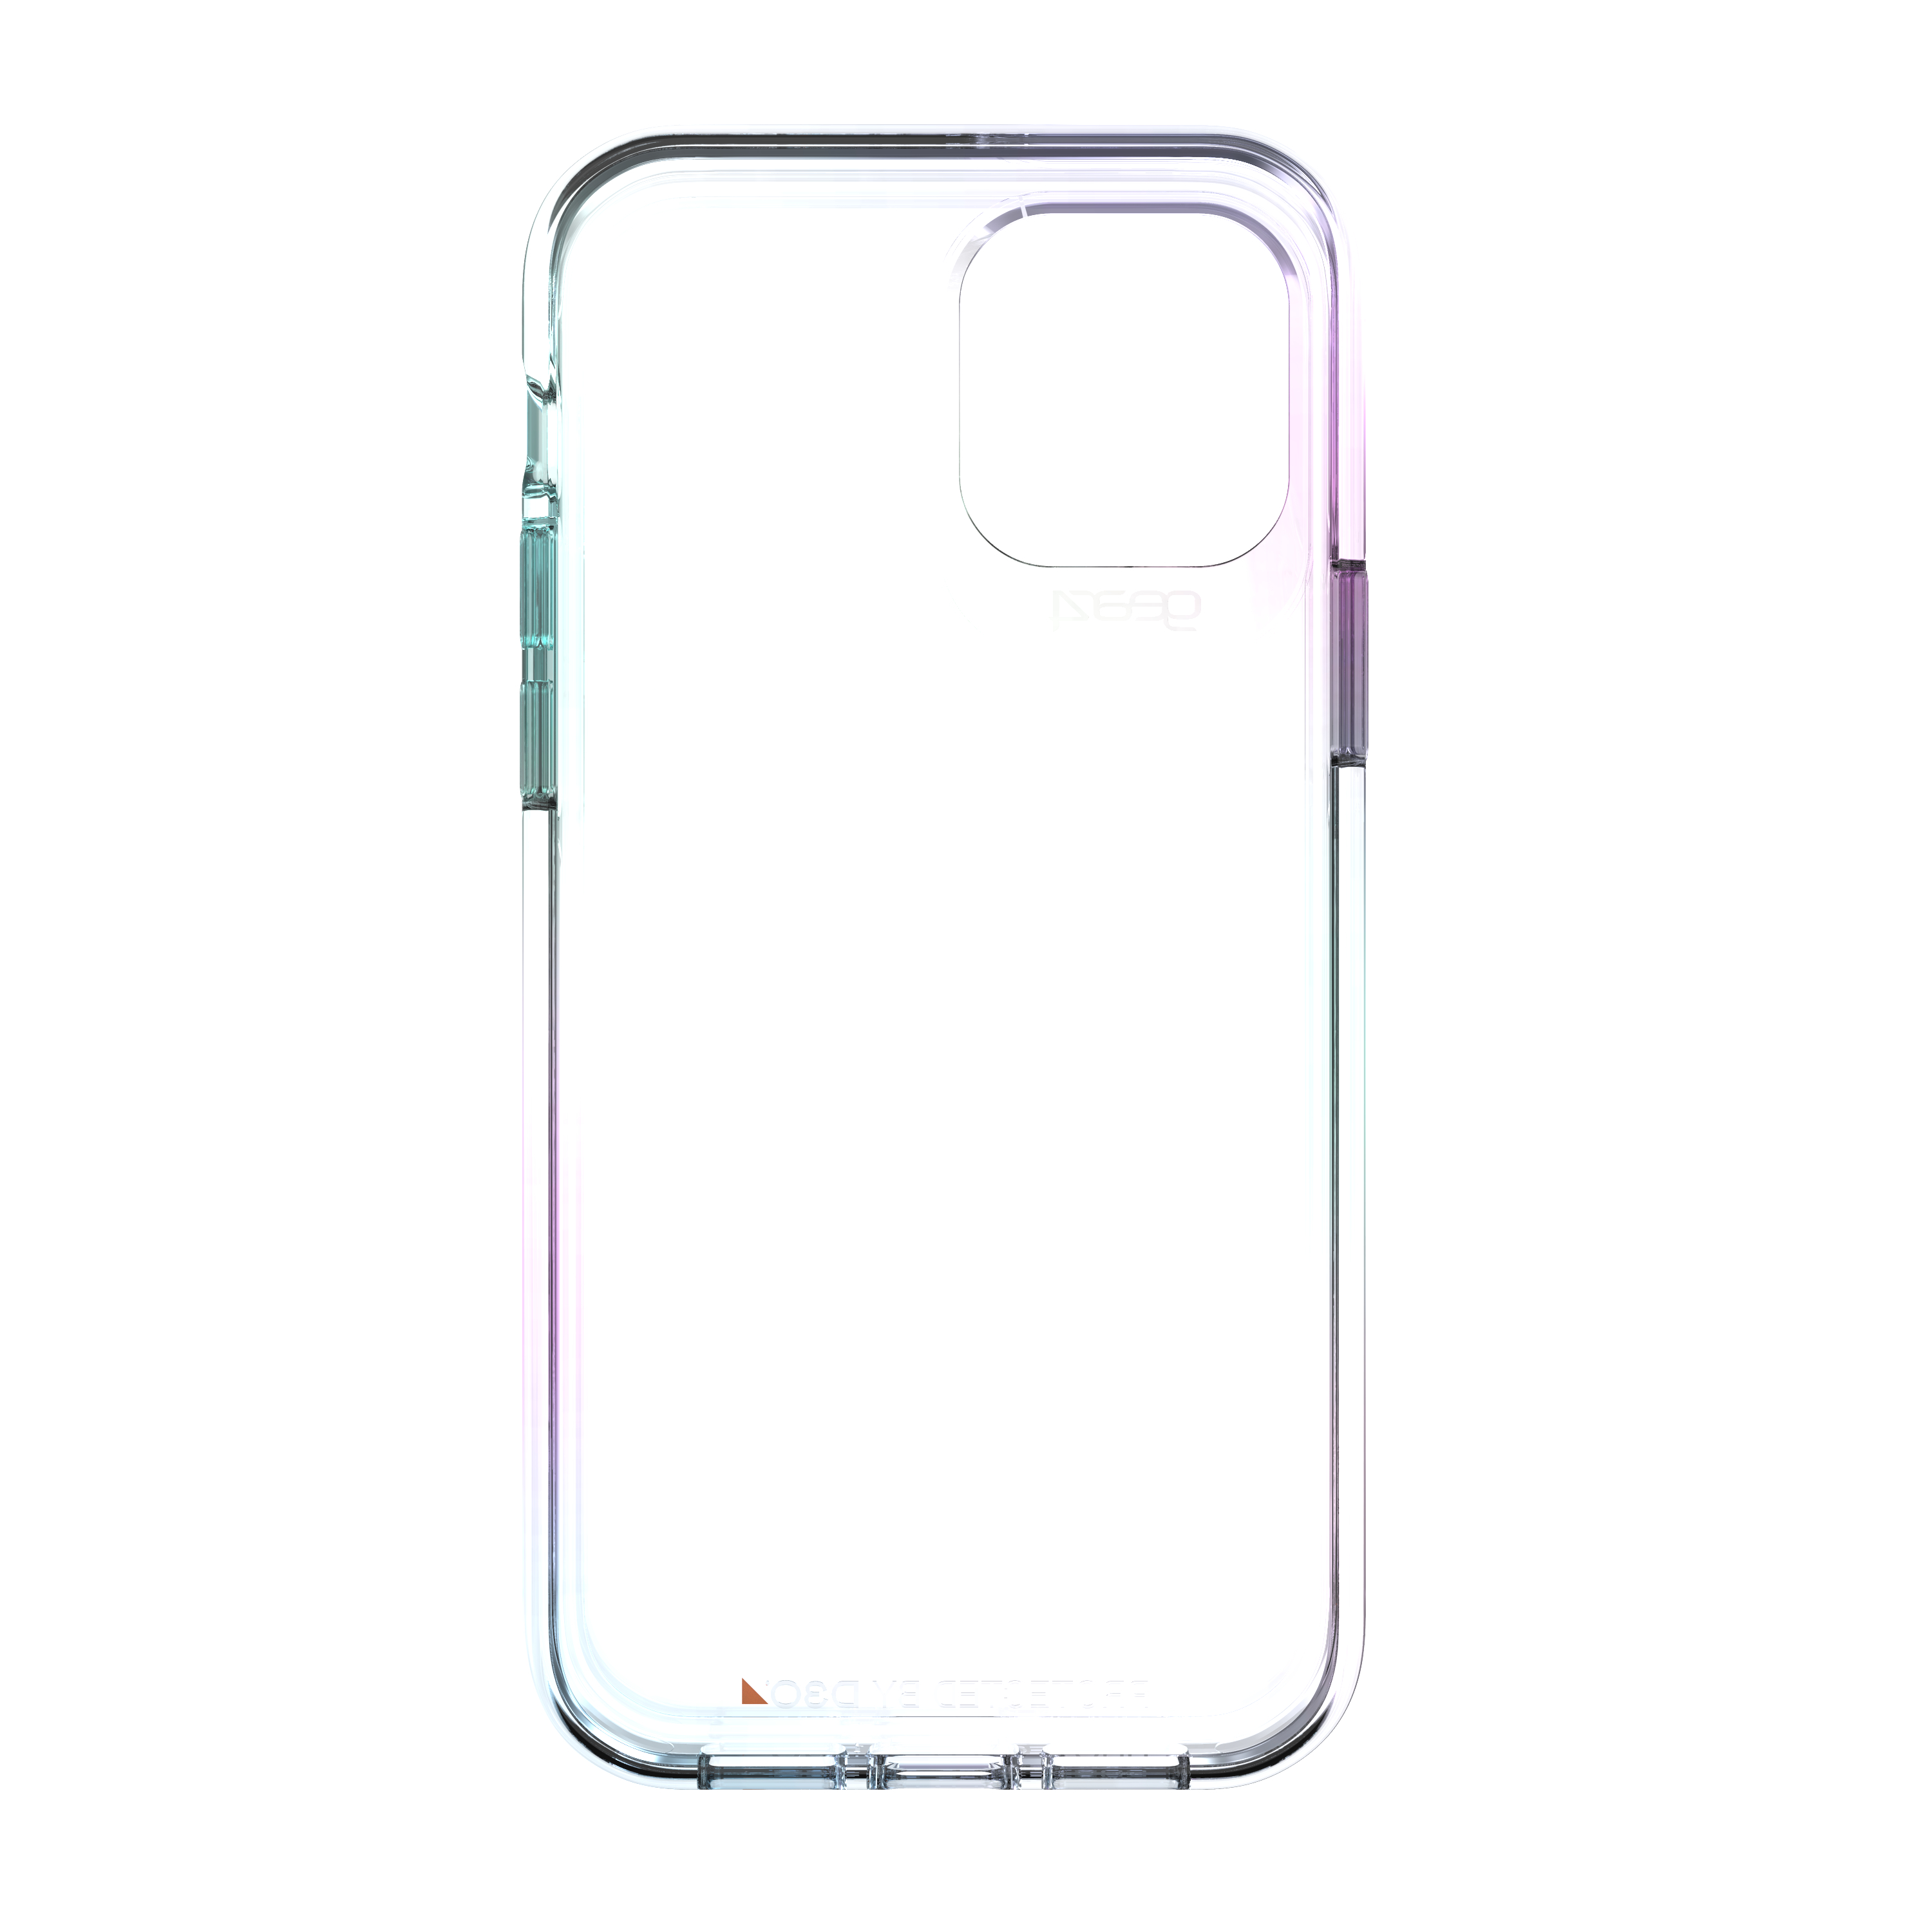 Iridescent Apple, Palace, iPhone GEAR4 Backcover, Pro, Crystal D3O 12/12